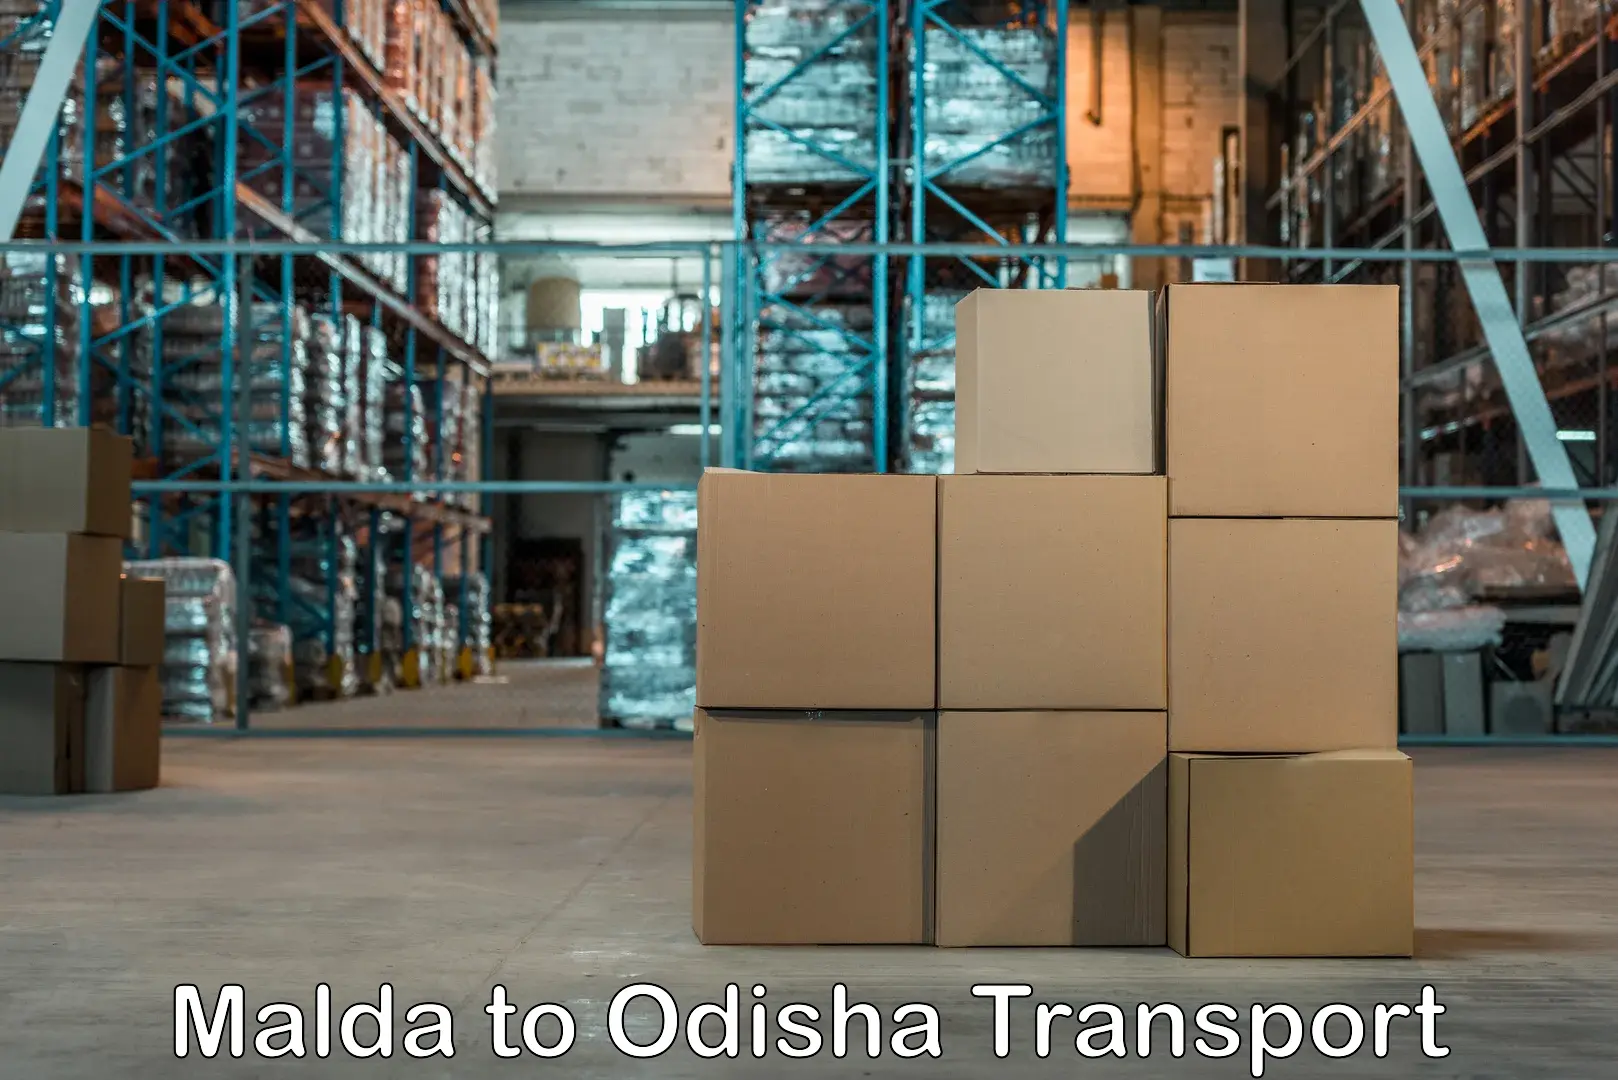 Transport bike from one state to another Malda to Odisha